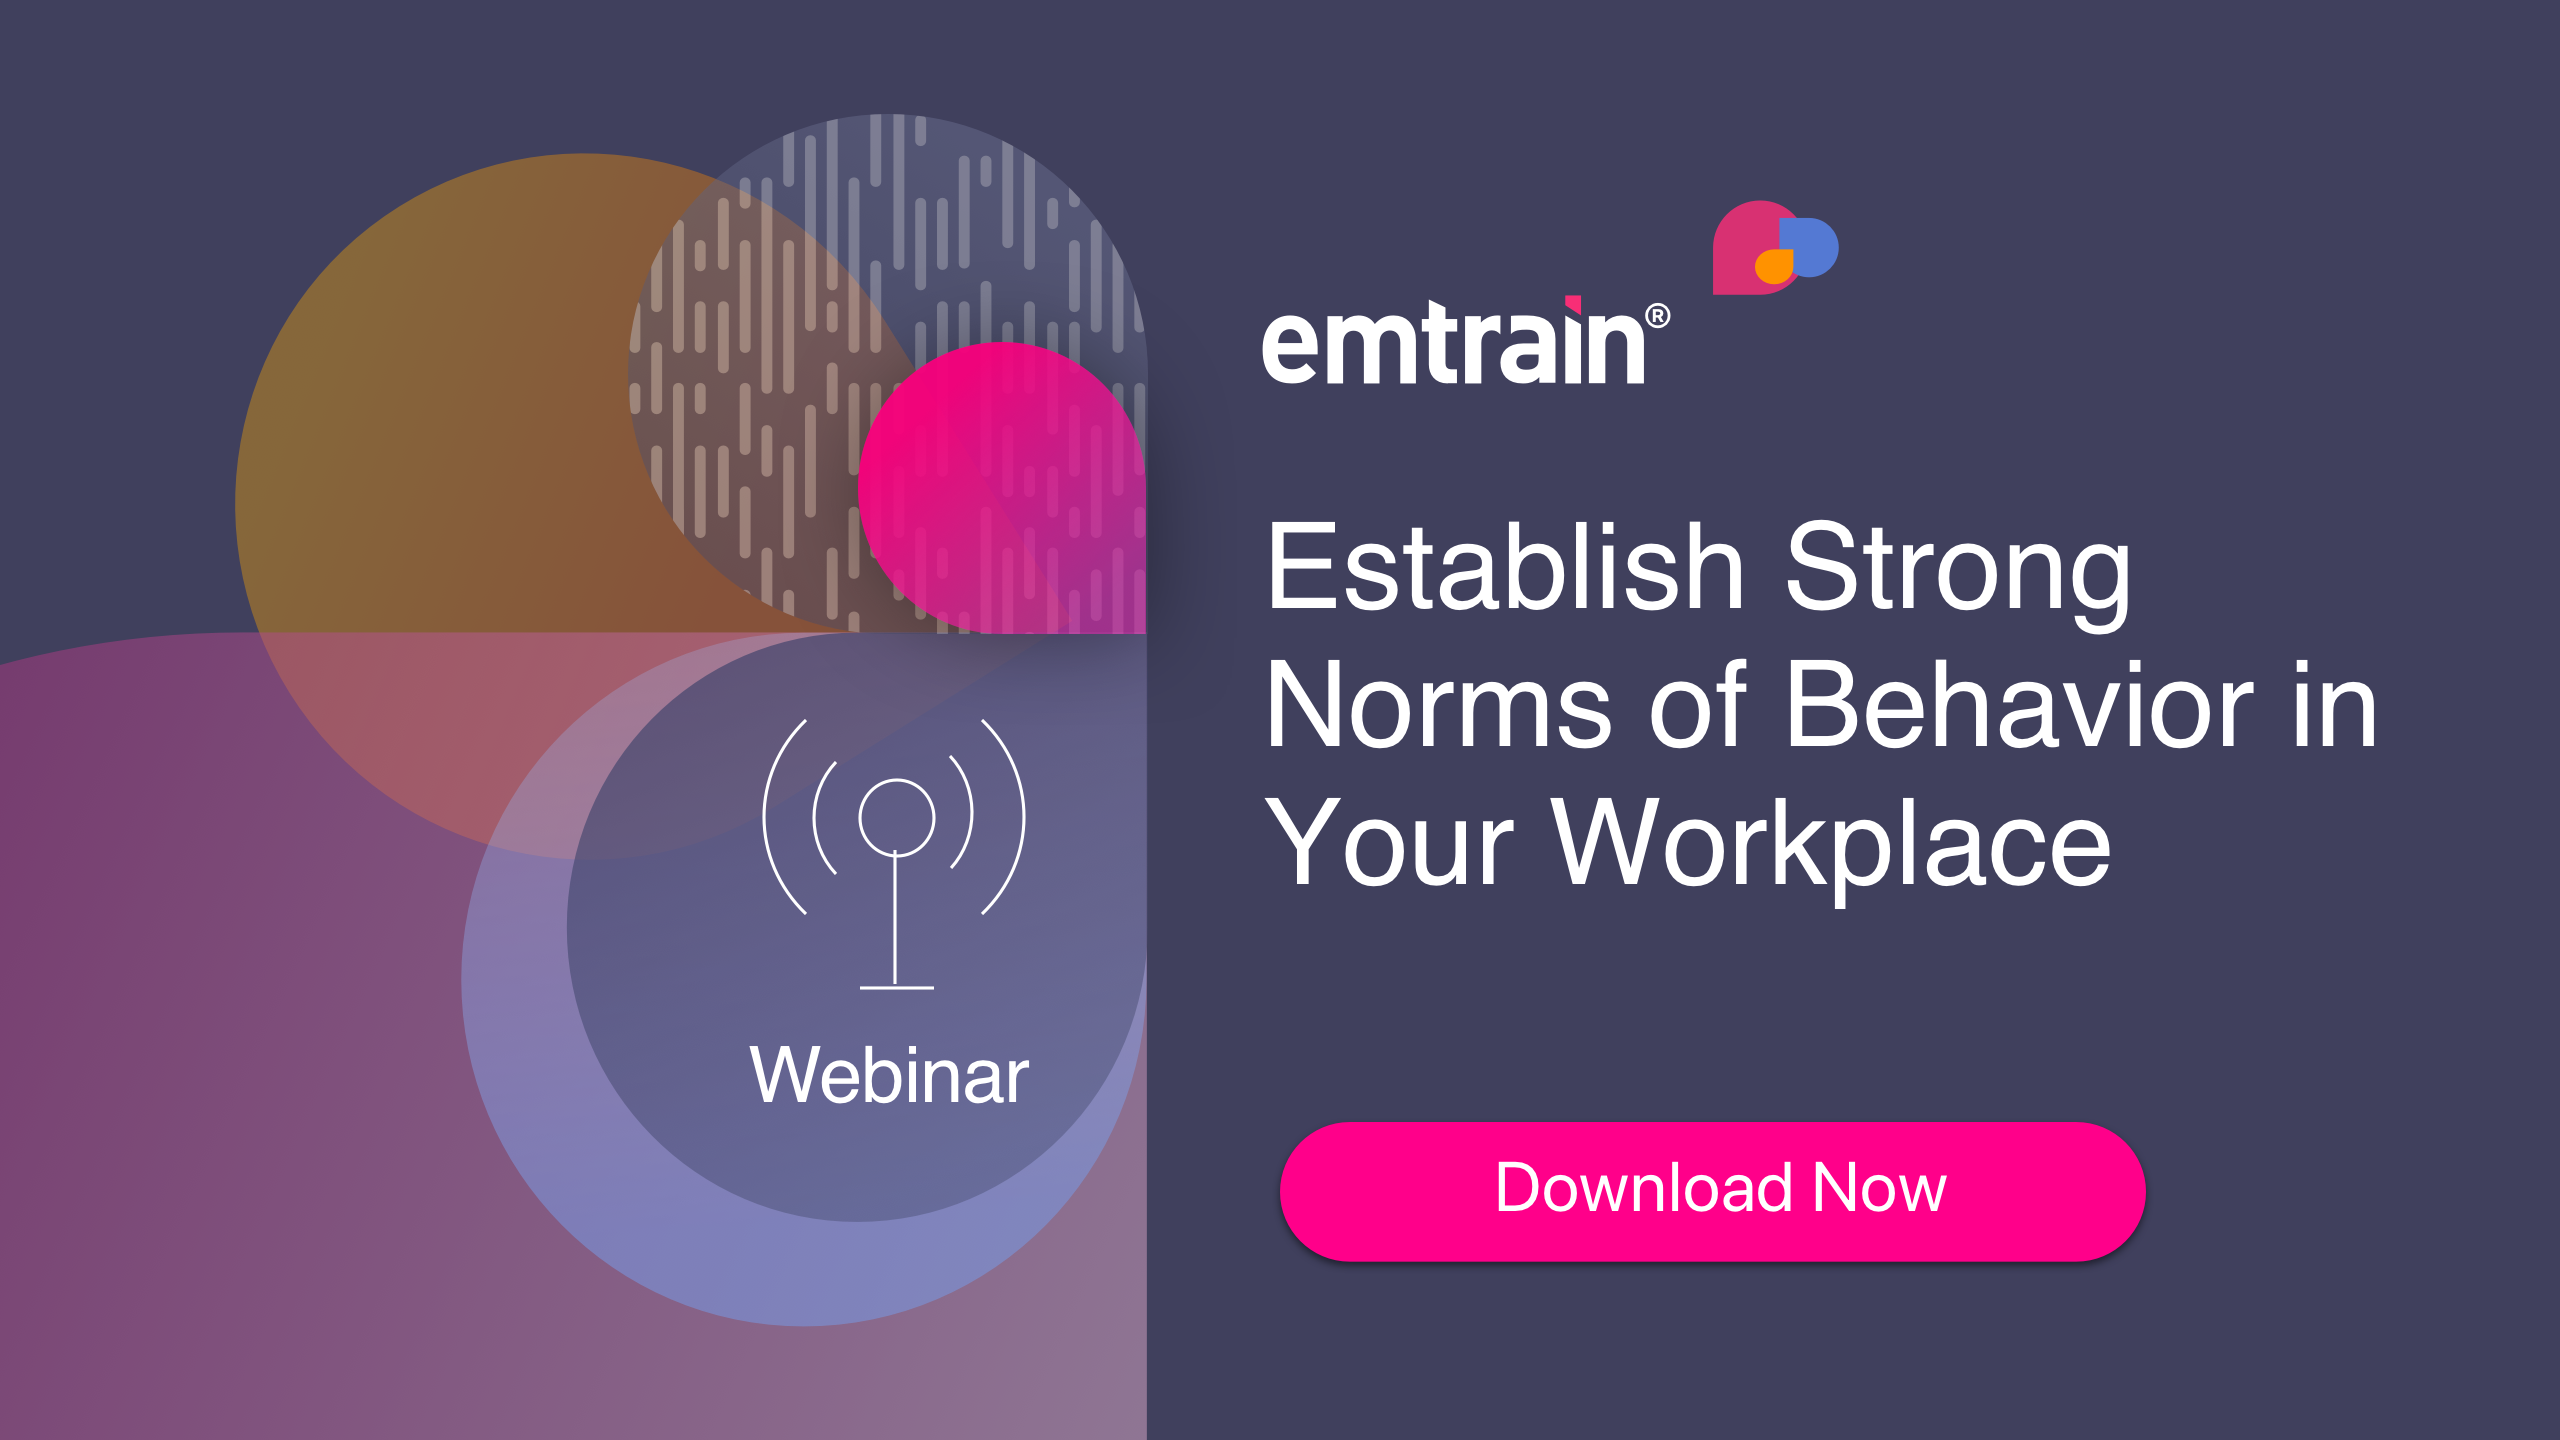 Establish Strong Norms of Behavior in Your Workplace